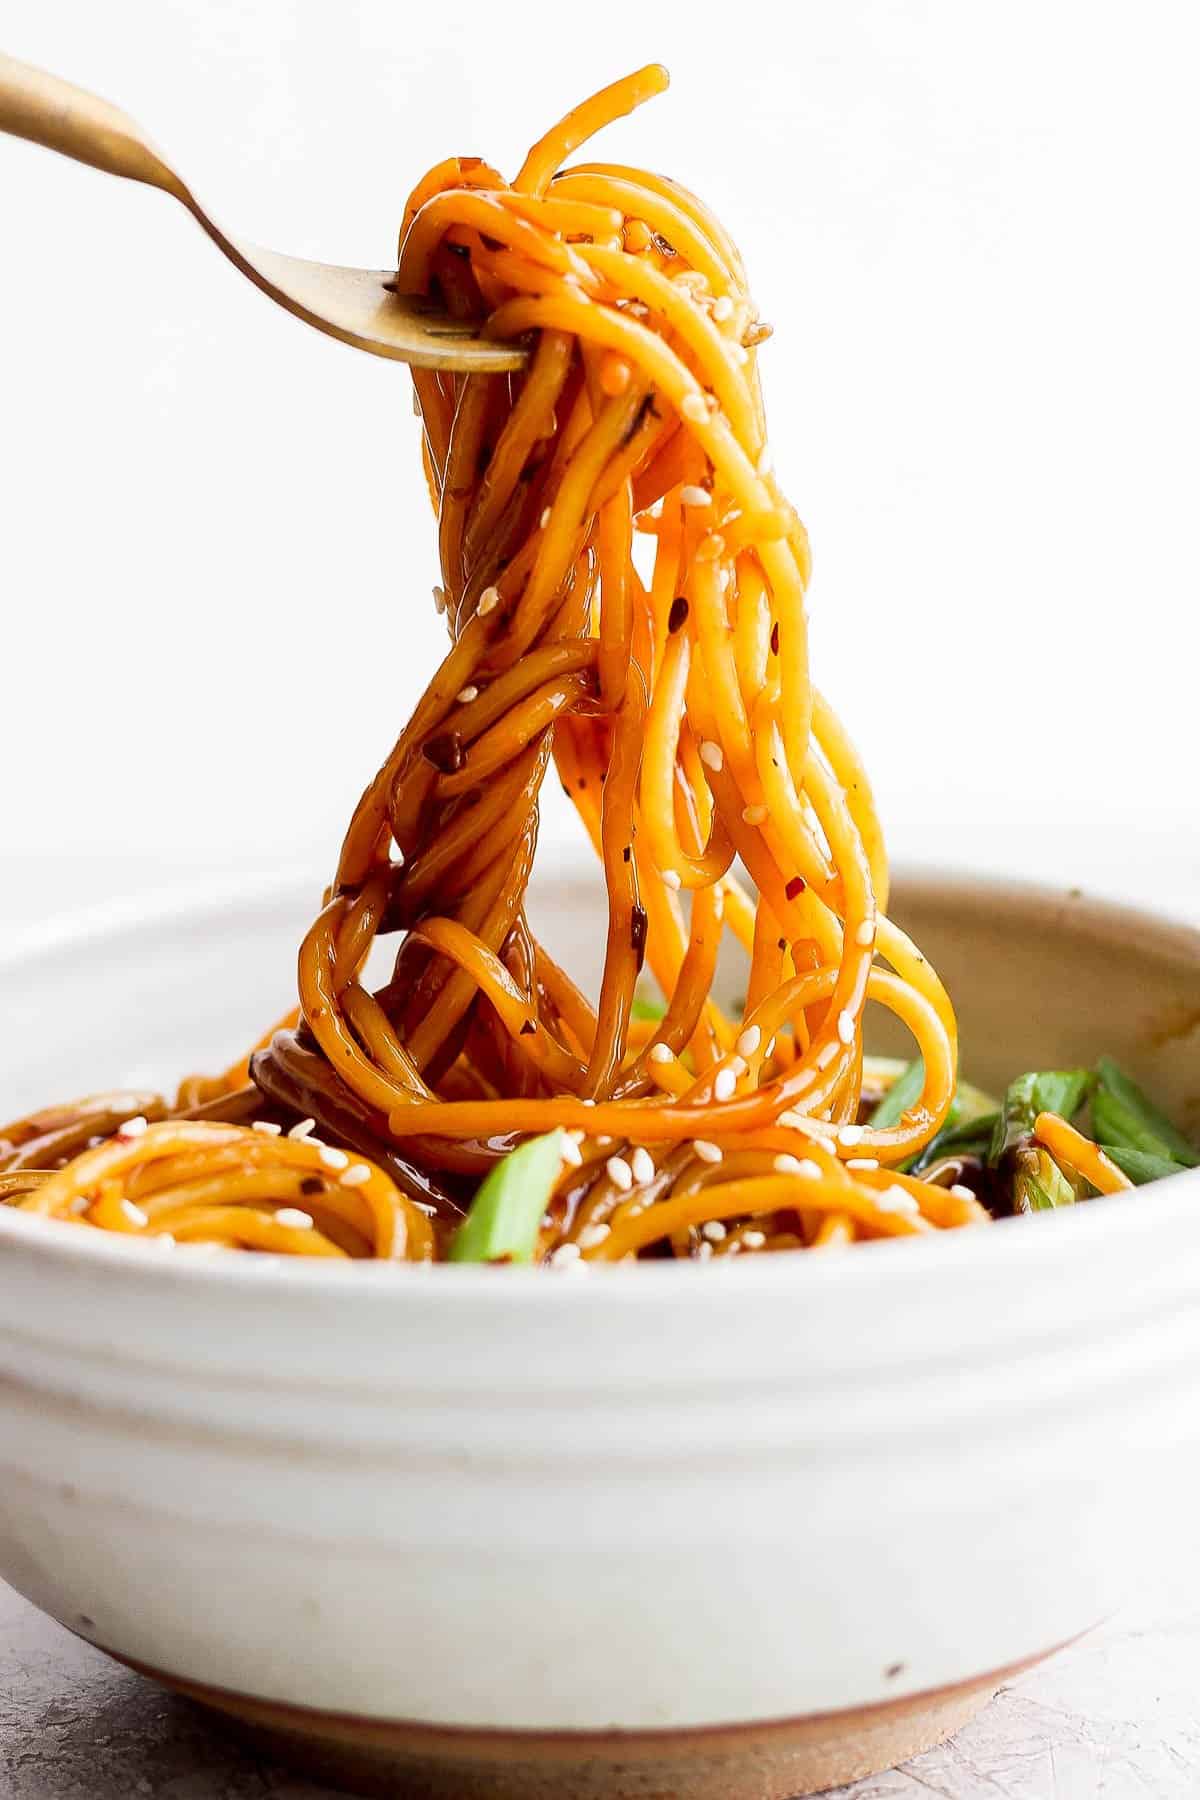 Teriyaki noodles being pulled out of a bowl with a fork.